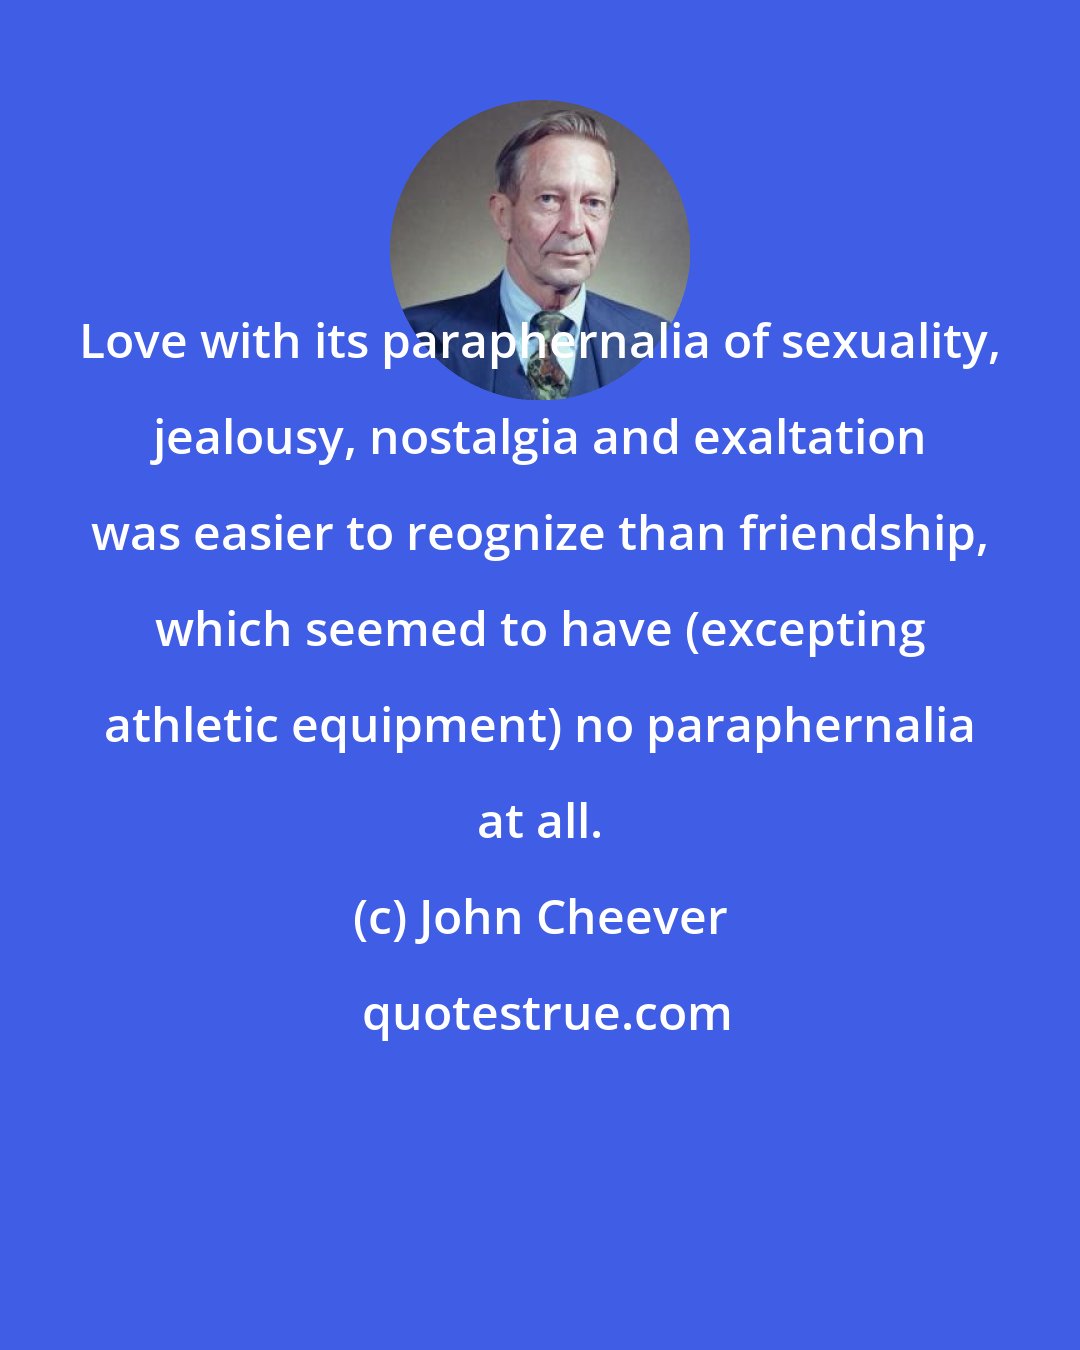 John Cheever: Love with its paraphernalia of sexuality, jealousy, nostalgia and exaltation was easier to reognize than friendship, which seemed to have (excepting athletic equipment) no paraphernalia at all.